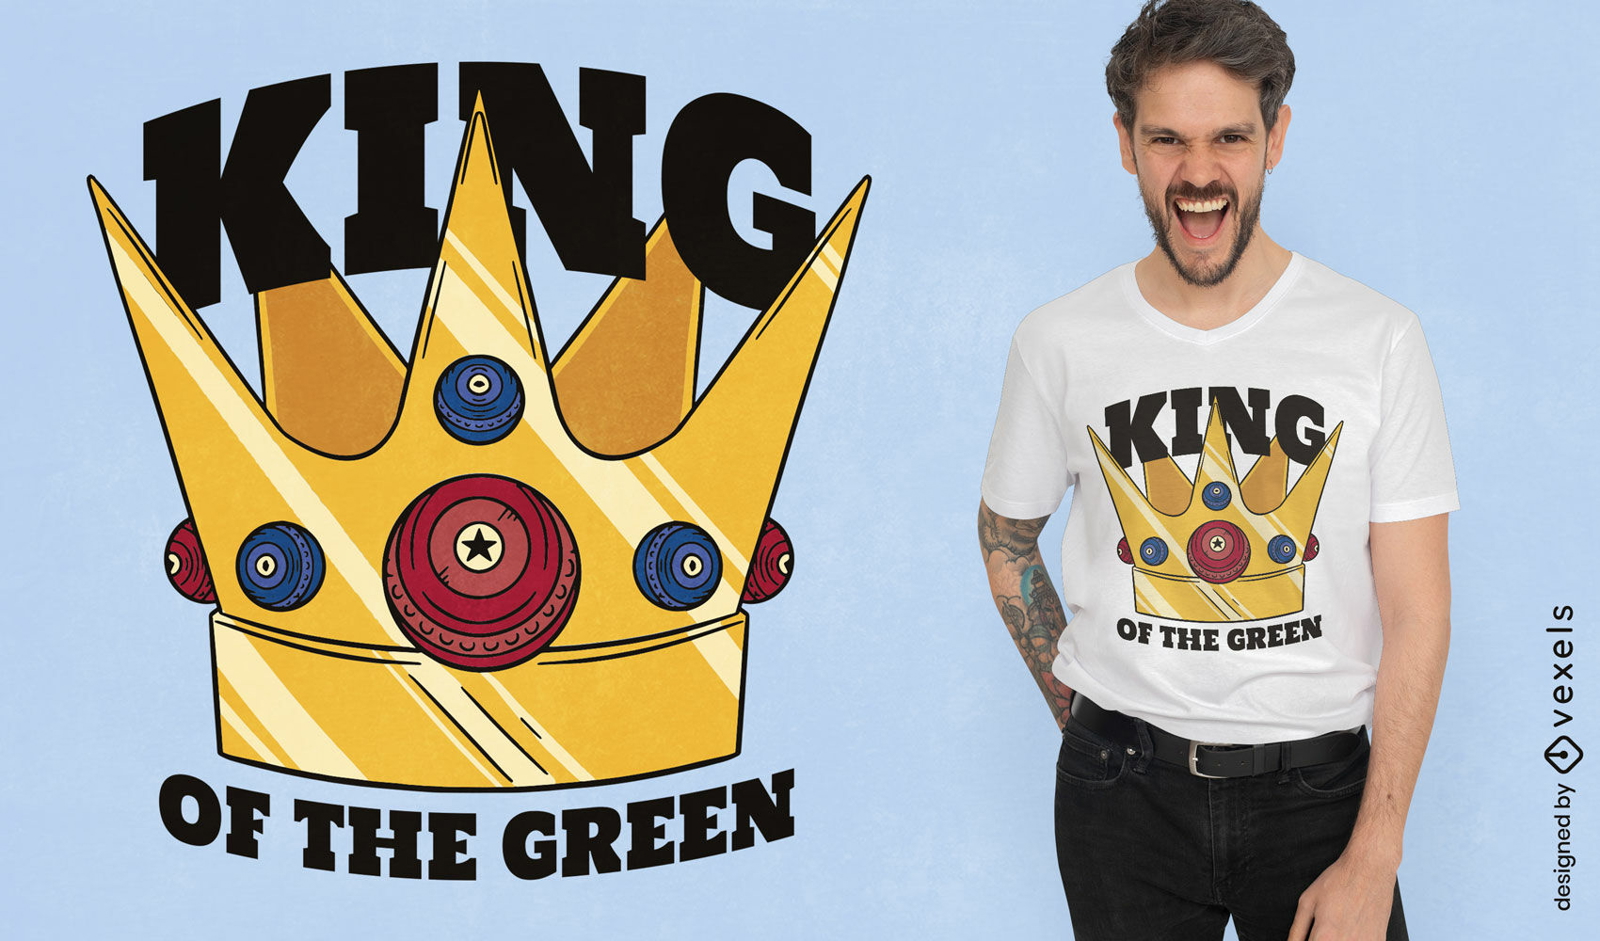 King of the green crown t-shirt design